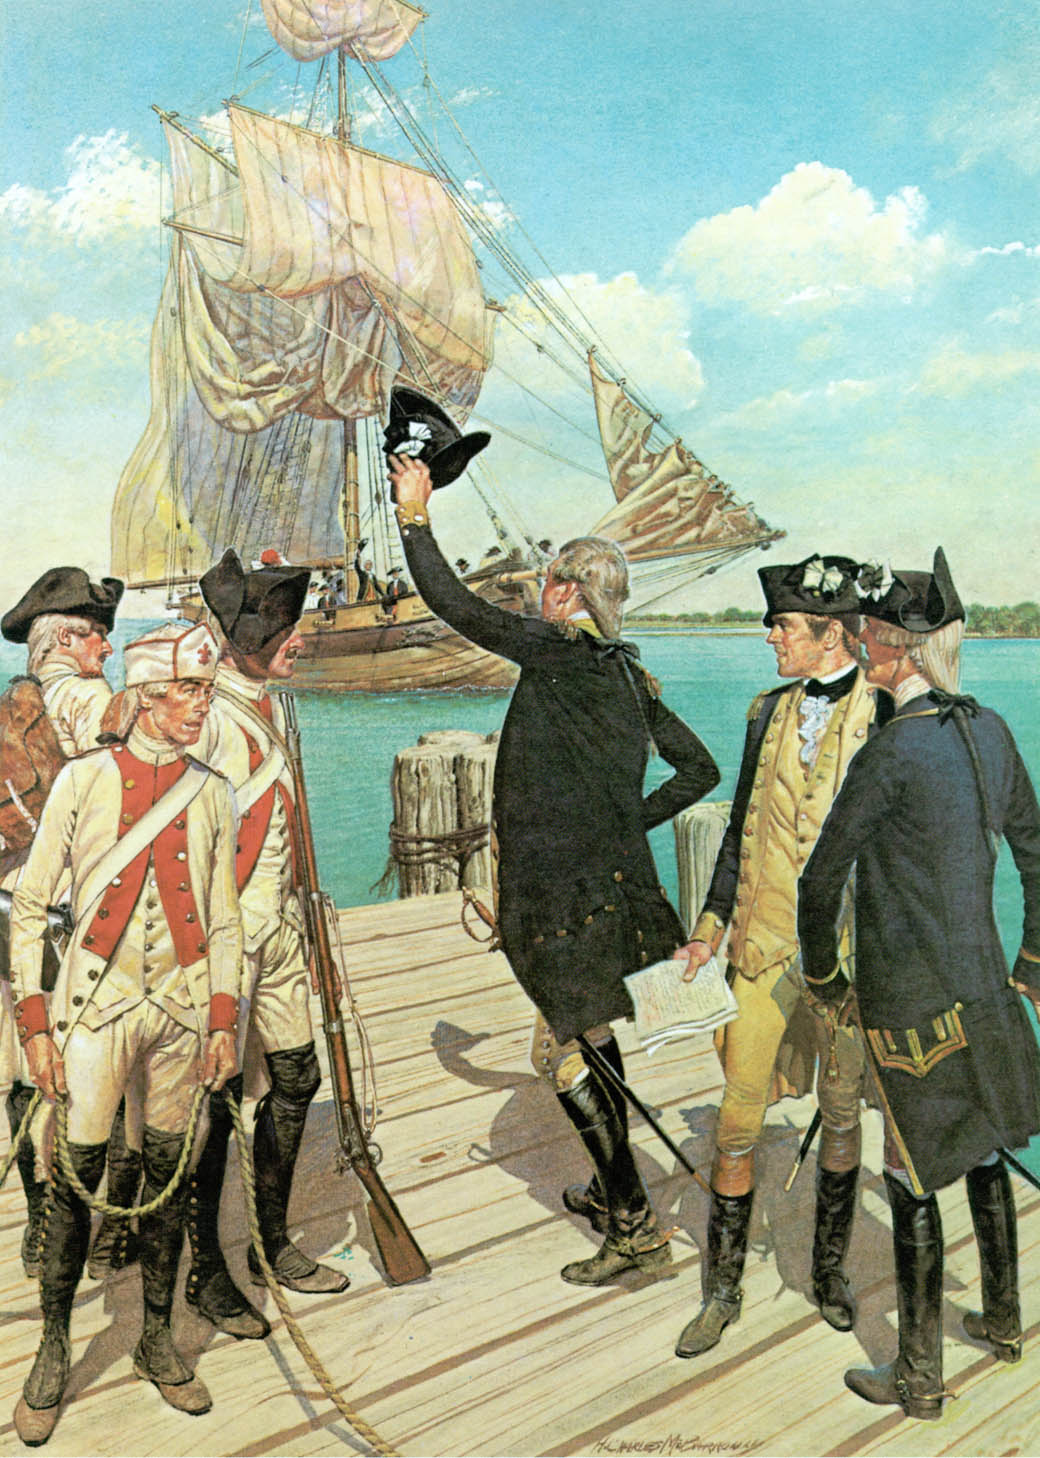 which countrys navy helped america during the revolutionary war